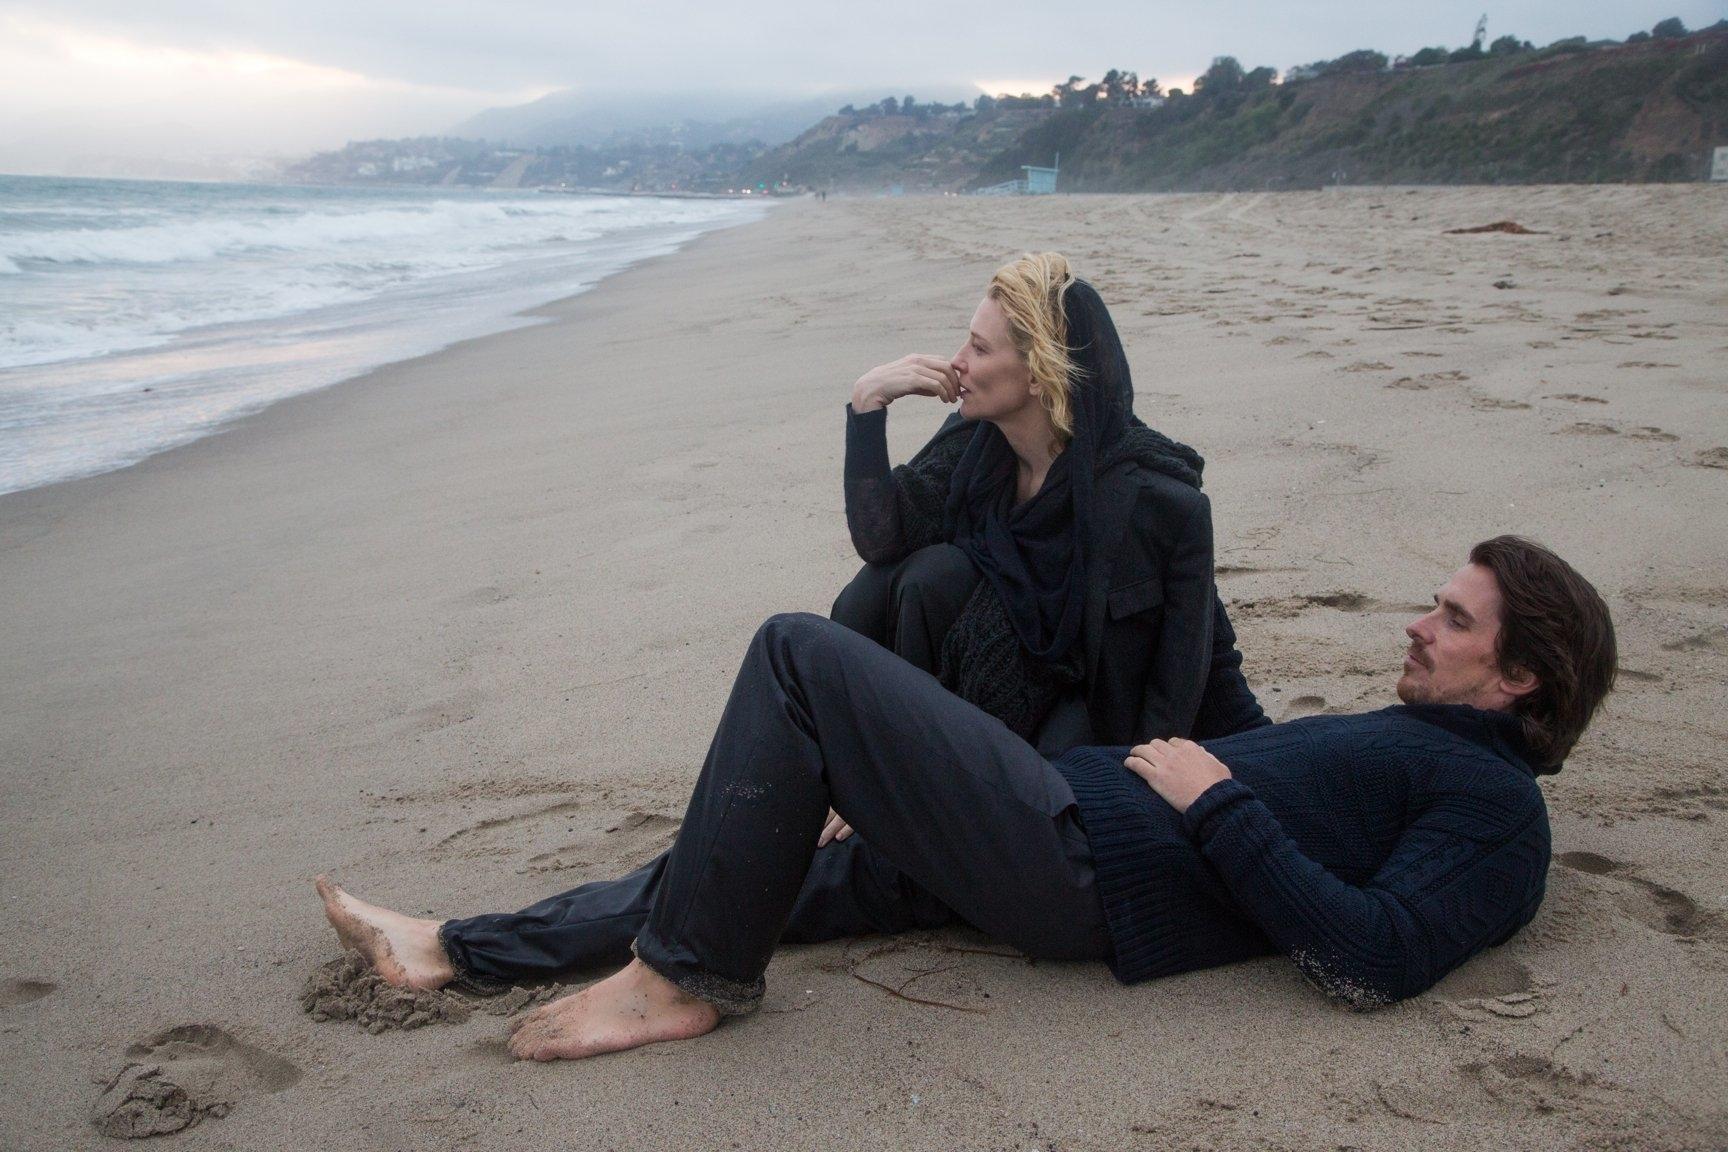 Image gallery for "Knight of Cups (2015)" - Filmaffinity